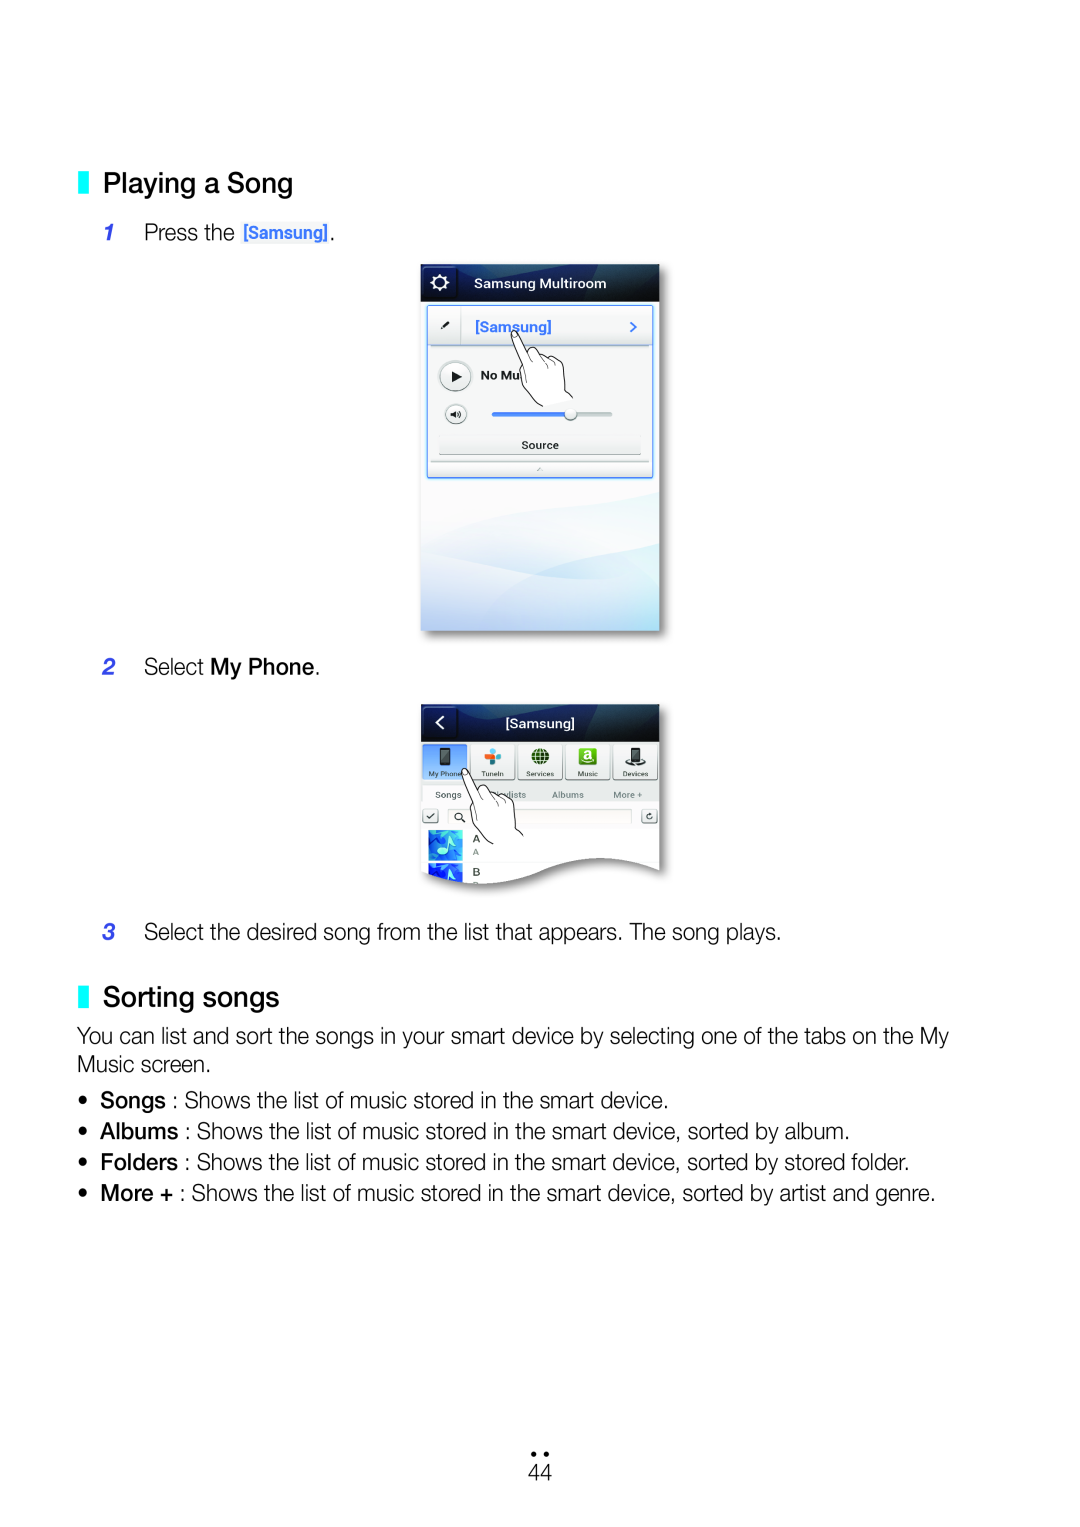 Samsung M5 user manual Playing a Song, Sorting songs 